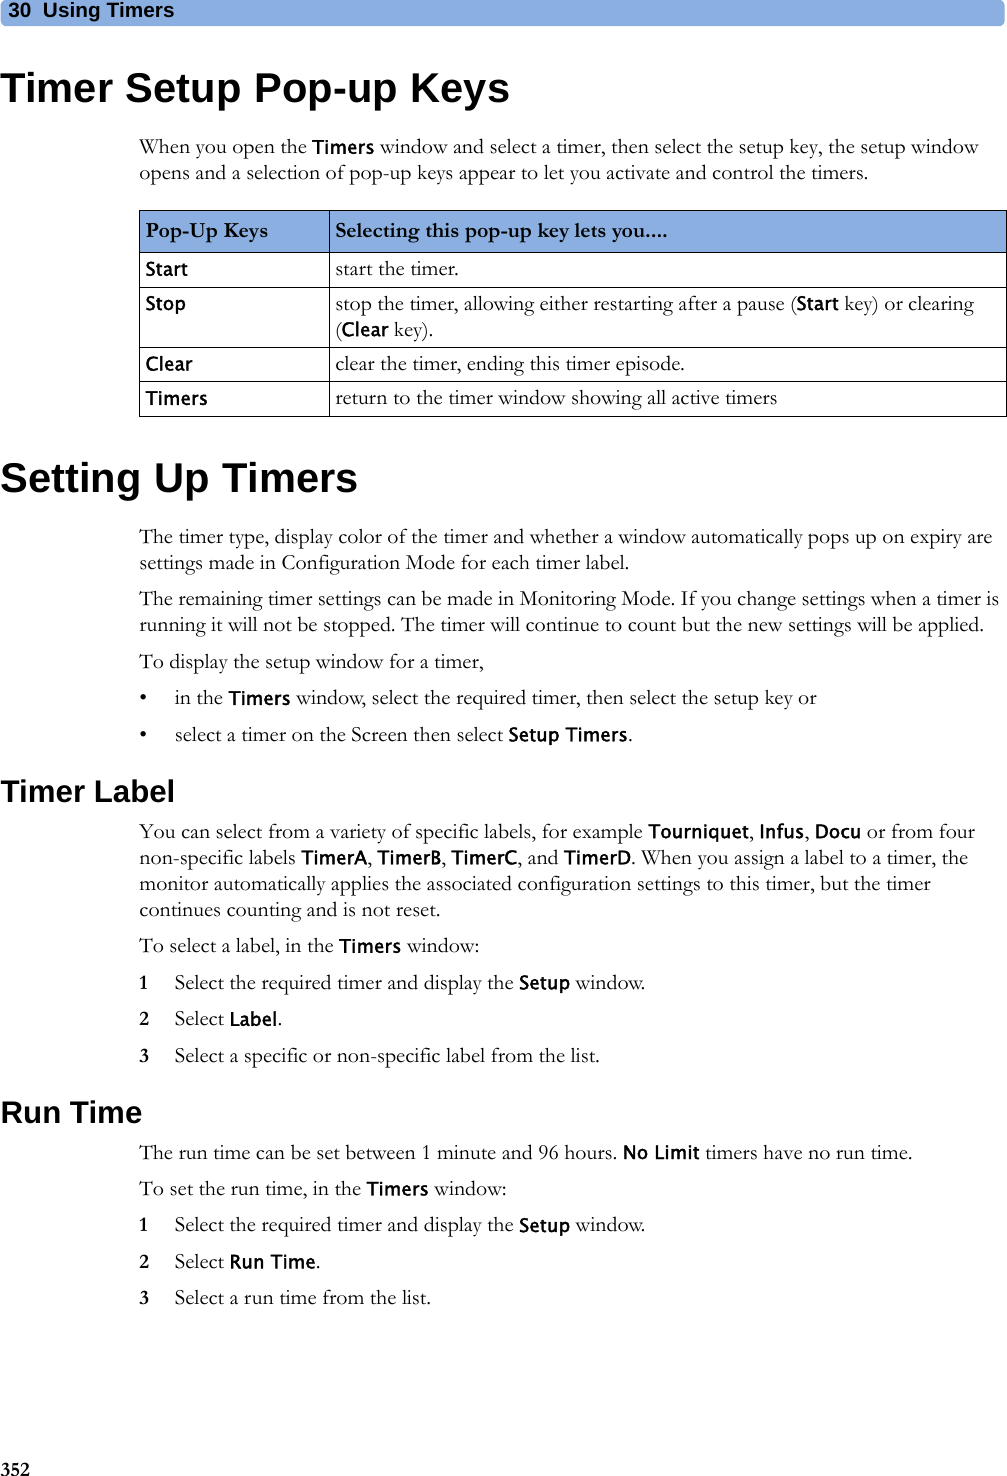 30 Using Timers352Timer Setup Pop-up KeysWhen you open the Timers window and select a timer, then select the setup key, the setup window opens and a selection of pop-up keys appear to let you activate and control the timers.Setting Up TimersThe timer type, display color of the timer and whether a window automatically pops up on expiry are settings made in Configuration Mode for each timer label.The remaining timer settings can be made in Monitoring Mode. If you change settings when a timer is running it will not be stopped. The timer will continue to count but the new settings will be applied.To display the setup window for a timer,•in the Timers window, select the required timer, then select the setup key or• select a timer on the Screen then select Setup Timers.Timer LabelYou can select from a variety of specific labels, for example Tourniquet, Infus, Docu or from four non-specific labels TimerA, TimerB, TimerC, and TimerD. When you assign a label to a timer, the monitor automatically applies the associated configuration settings to this timer, but the timer continues counting and is not reset.To select a label, in the Timers window:1Select the required timer and display the Setup window.2Select Label.3Select a specific or non-specific label from the list.Run TimeThe run time can be set between 1 minute and 96 hours. No Limit timers have no run time.To set the run time, in the Timers window:1Select the required timer and display the Setup window.2Select Run Time.3Select a run time from the list.Pop-Up Keys Selecting this pop-up key lets you....Start start the timer.Stop stop the timer, allowing either restarting after a pause (Start key) or clearing (Clear key).Clear clear the timer, ending this timer episode.Timers return to the timer window showing all active timers